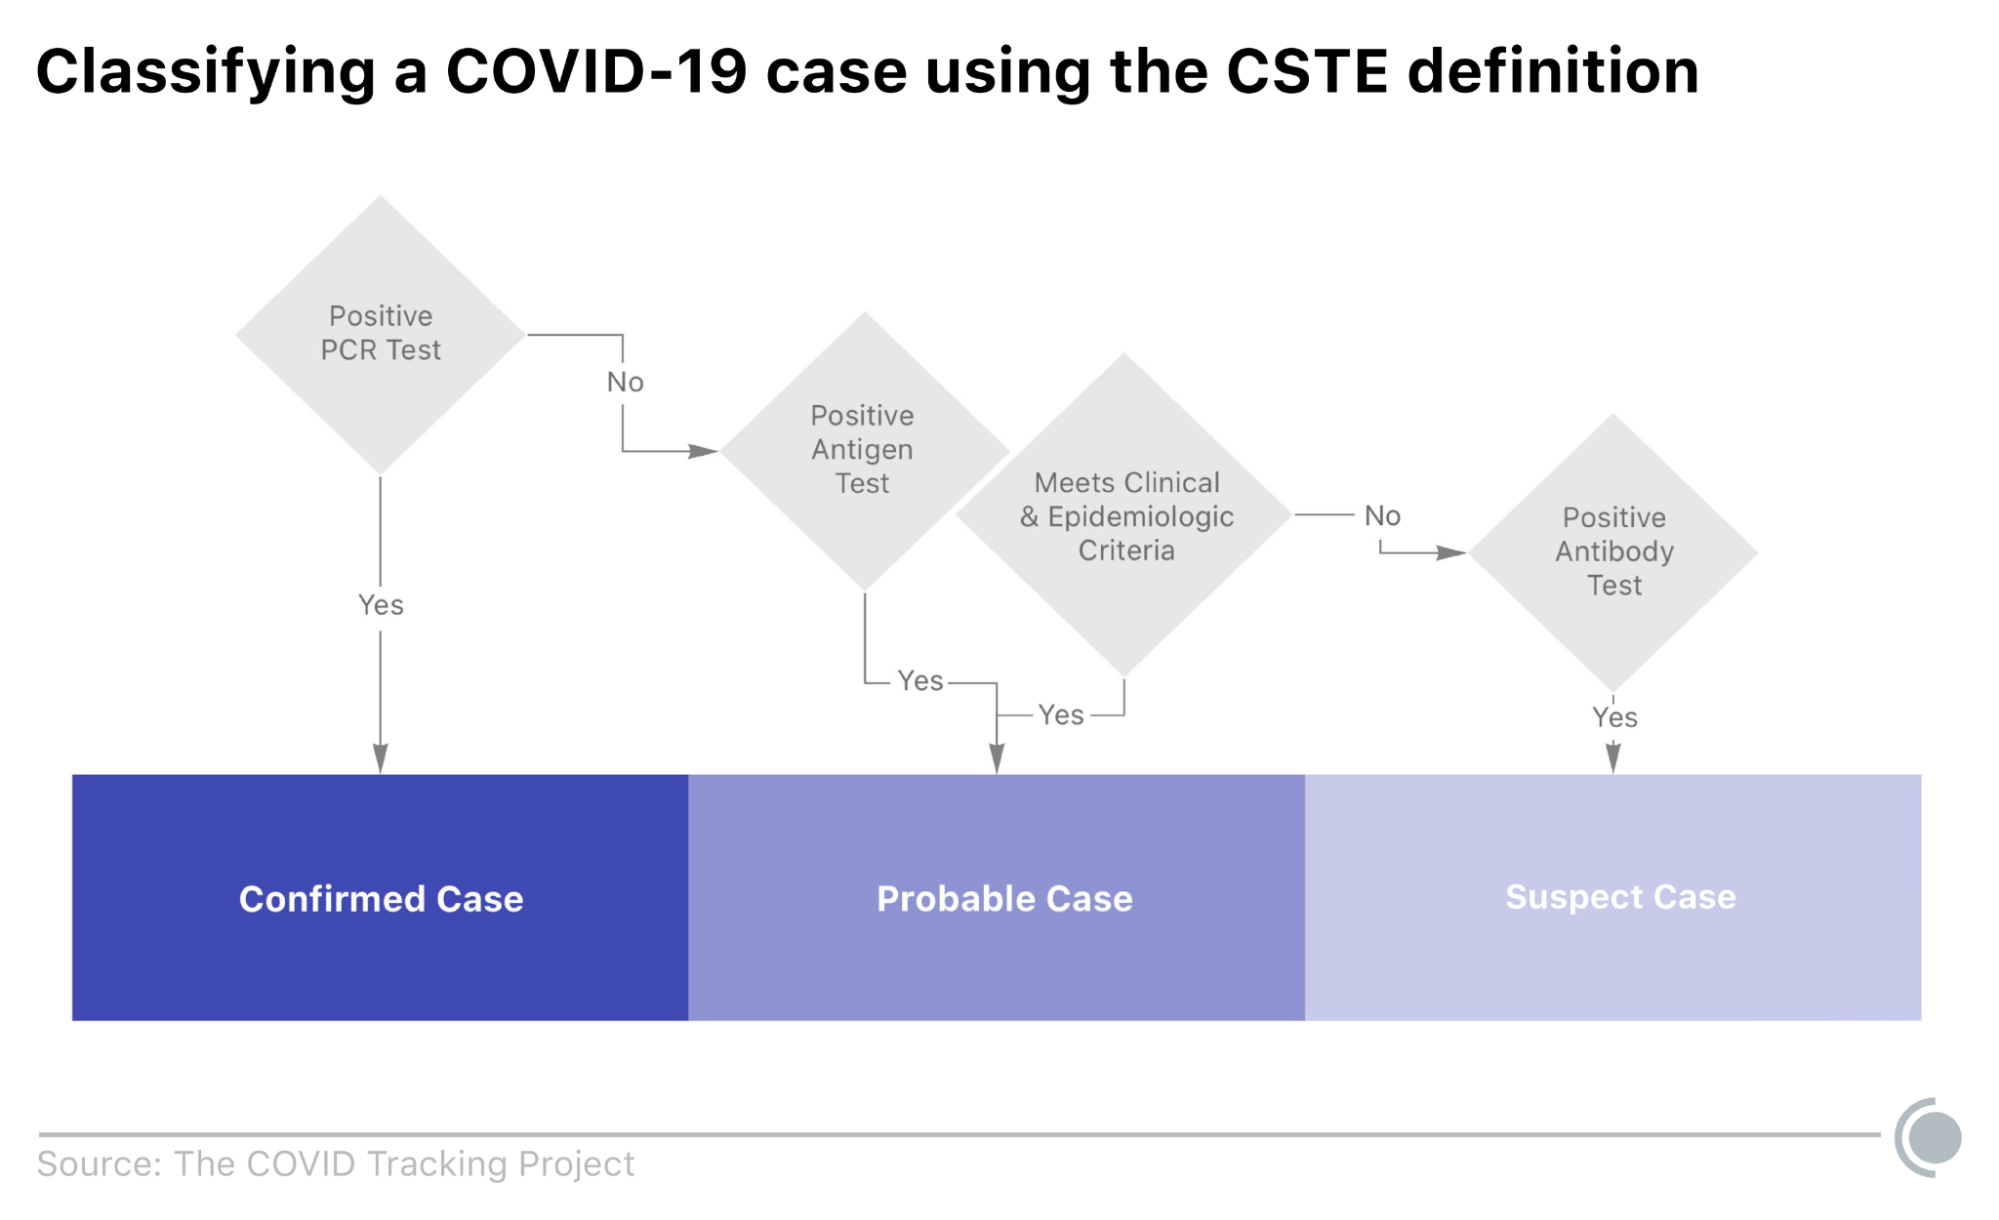 A flow chart shows the classification of confirmed, probable and suspect COVID-19 cases following the most recent CSTE case definition. Confirmed cases are identified with a positive PCR tests, probable cases with either a positive antigen test or satisfying both clinical and epidemiologic criteria, and suspect cases with a positive antibody test.